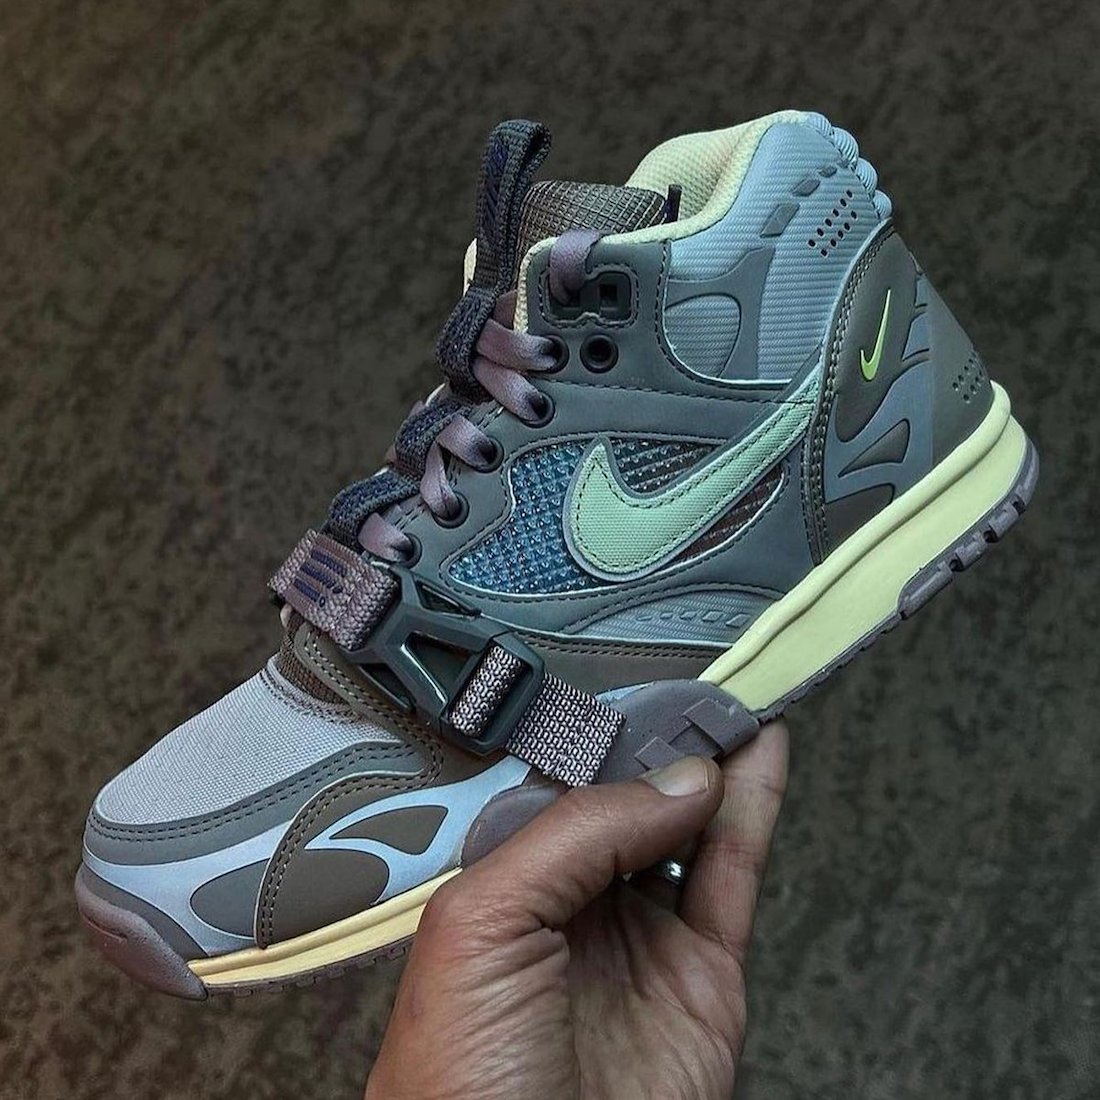 Nike Air Trainer 1 Utility Light Smoke Grey Honeydew Particle Grey DH7338-002 Release Date